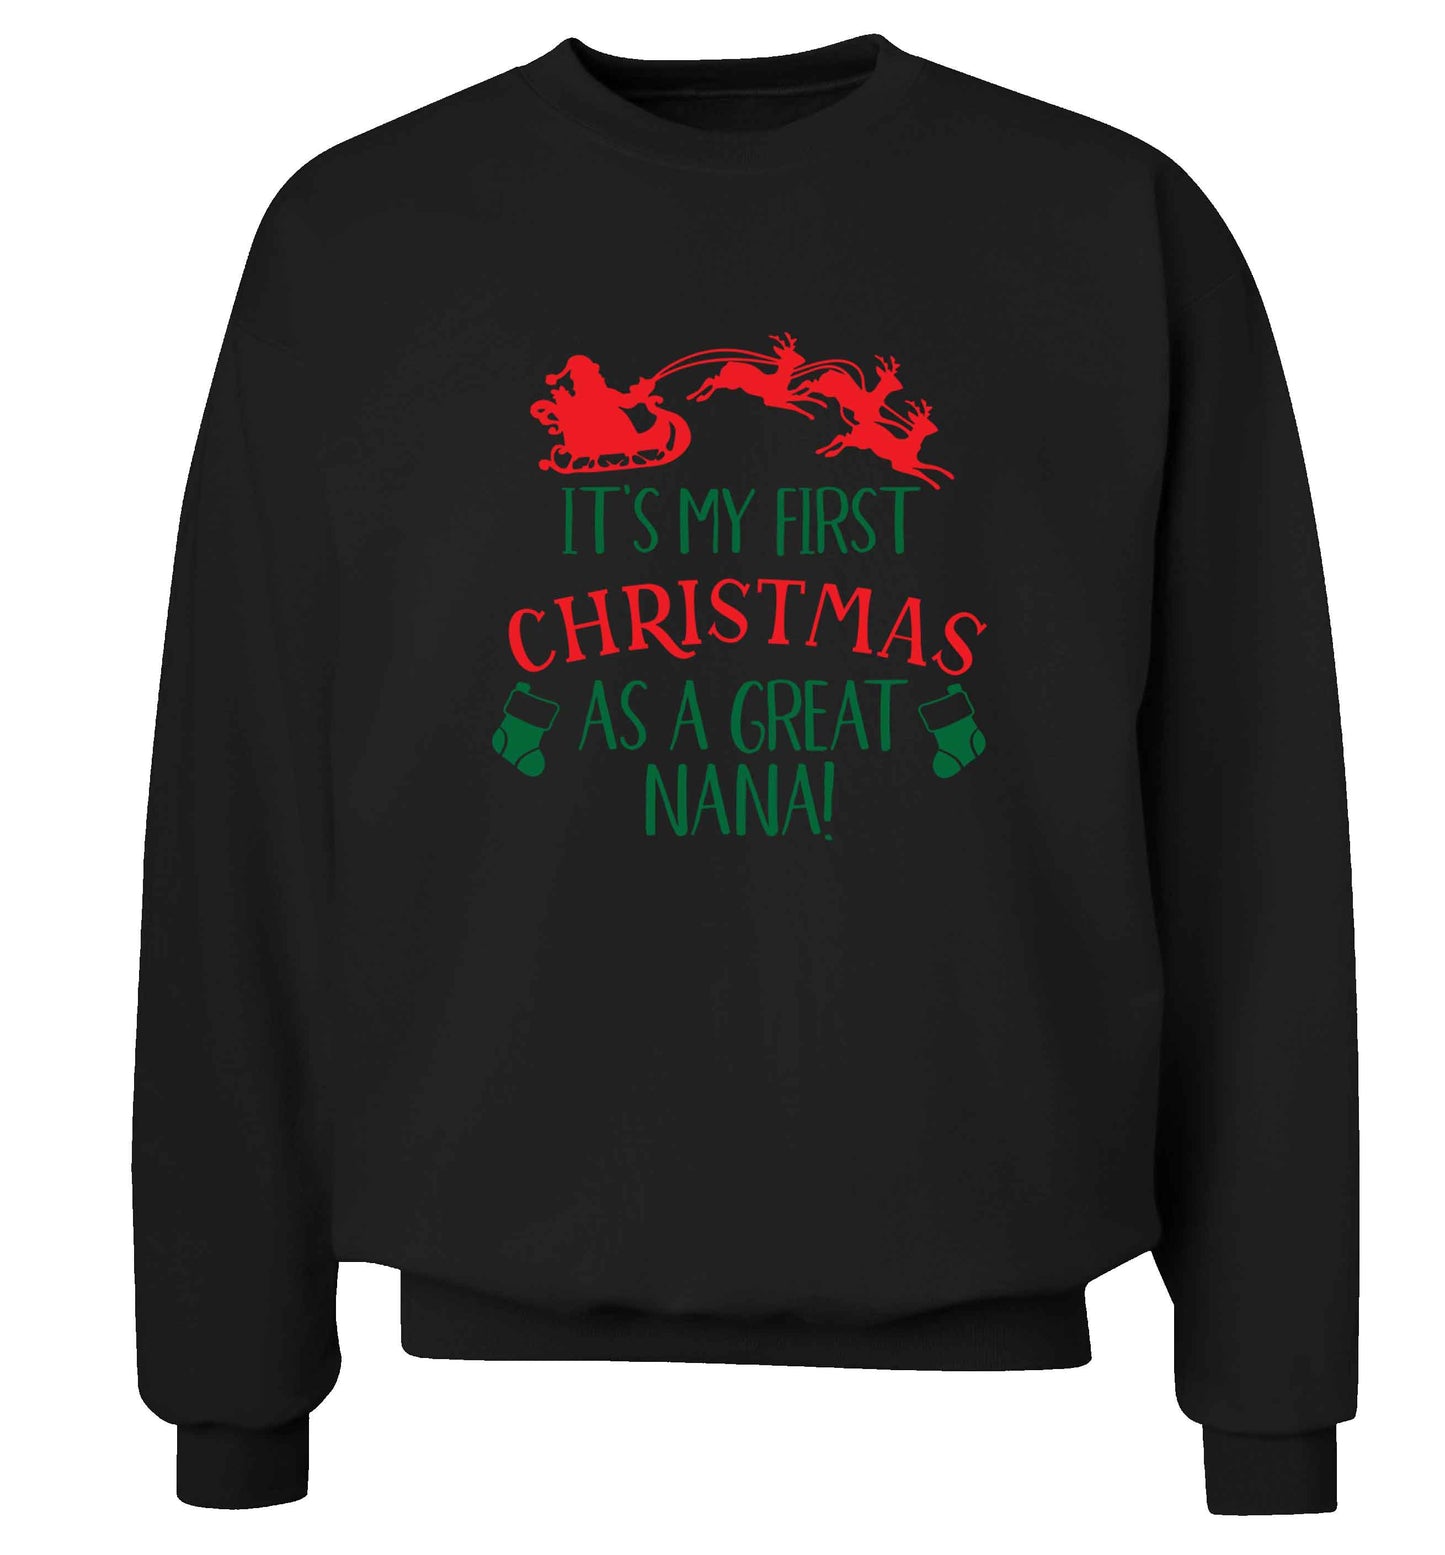 It's my first Christmas as a great nana! Adult's unisex black Sweater 2XL